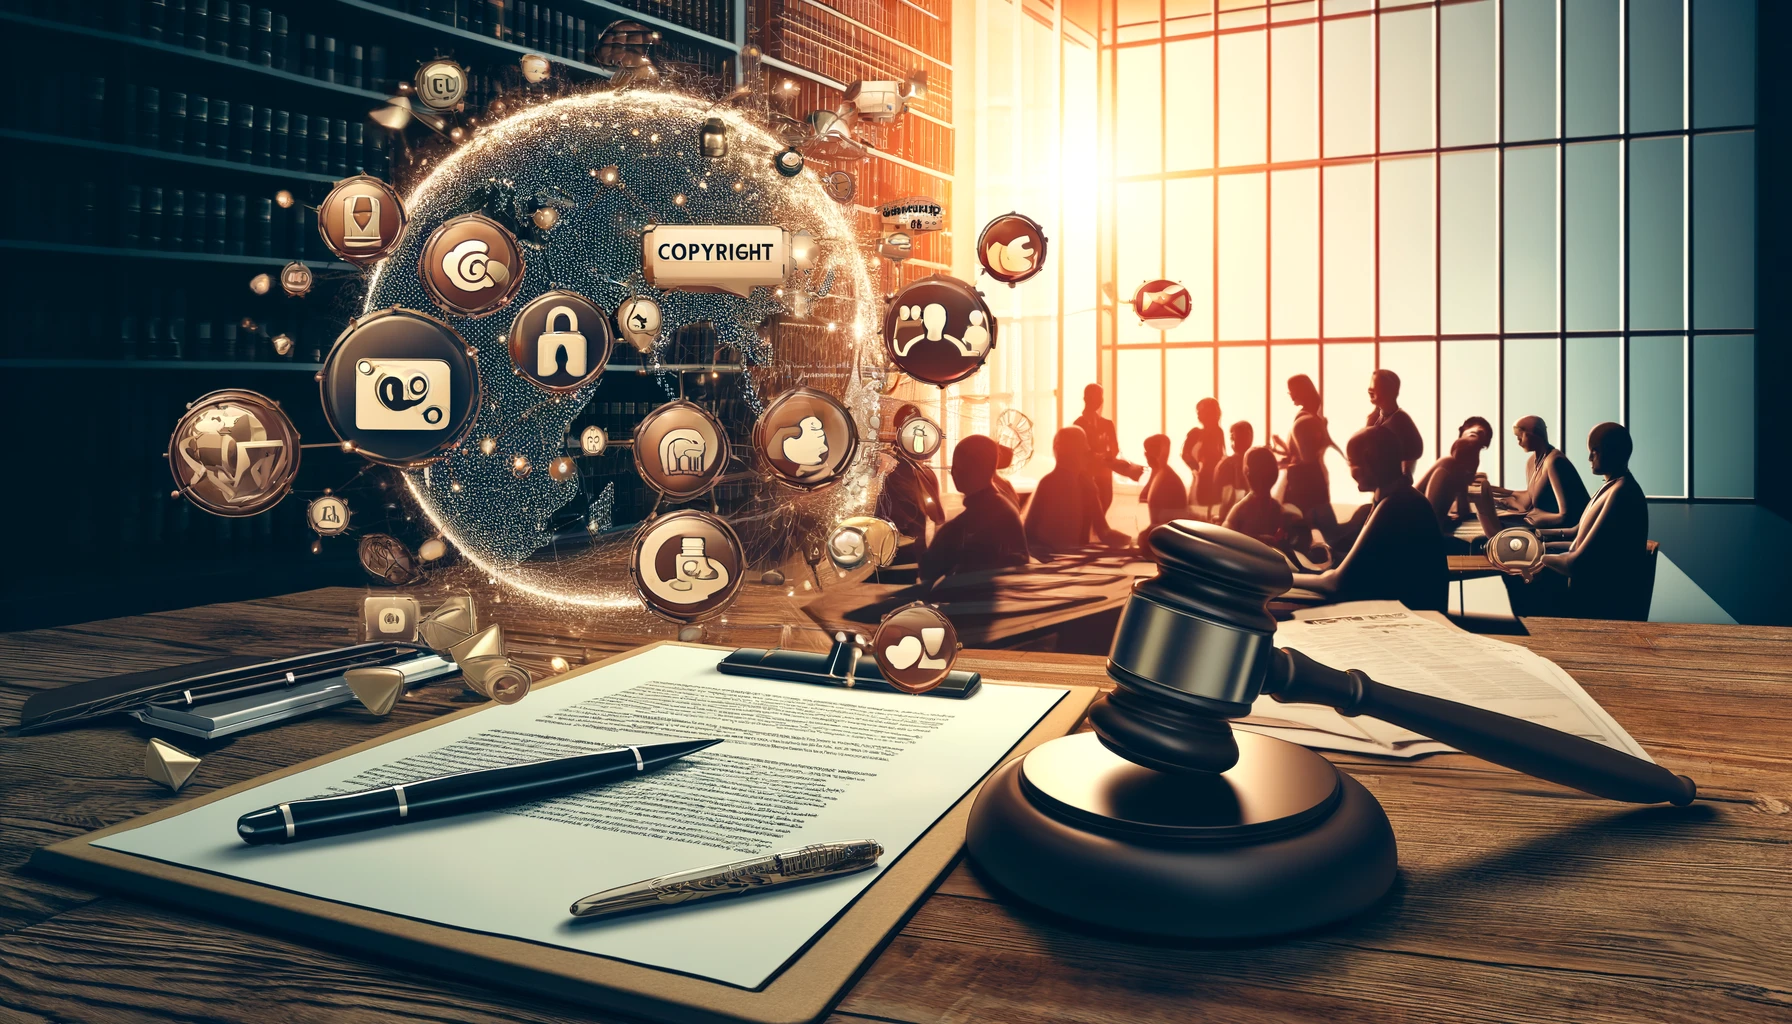 A professional image depicting a business setting focused on addressing legal and copyright issues in user-generated content marketing, featuring documents, a gavel, a digital screen displaying UGC, and copyright symbols, emphasizing caution and legal aspects of UGC strategies.